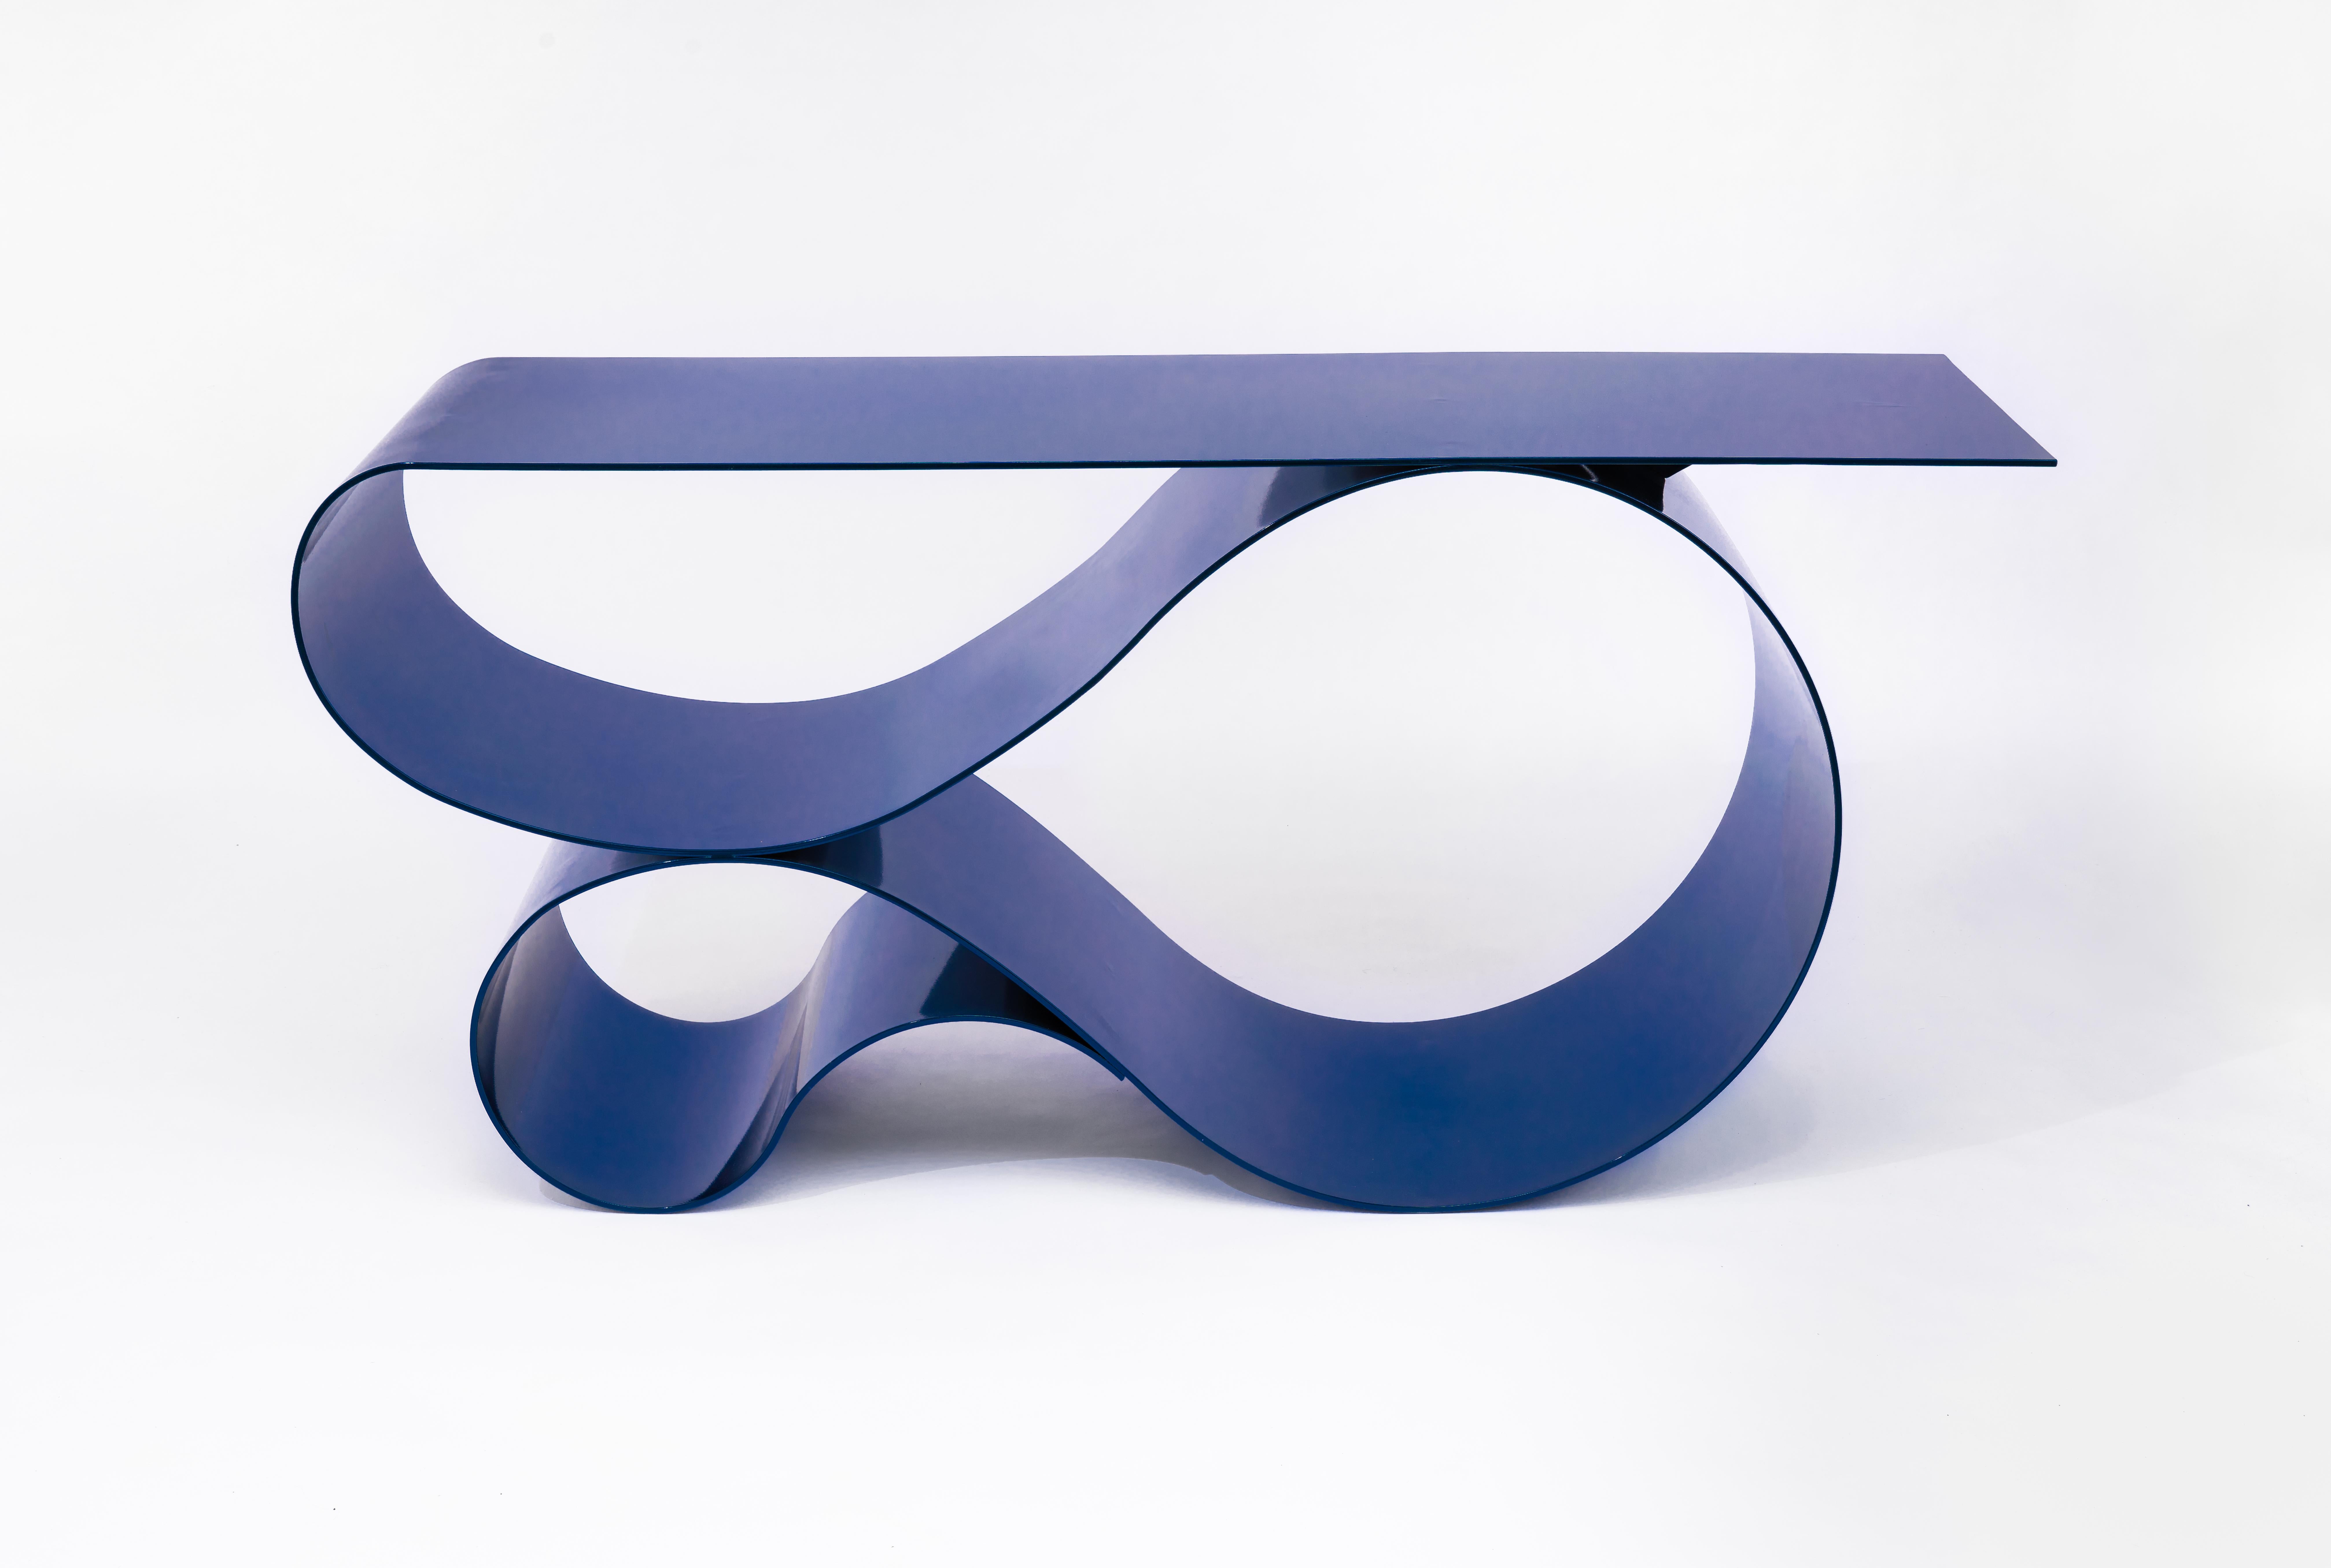 Whorl console in blue powder coated aluminum by Neal Aronowitz Design
Dimensions: D 43.2 x W 160 x H 76.2 cm
Materials: Powder coated aluminium.
Size, colors and finish can be modified and customized. 

An elegant and powerful sculptural